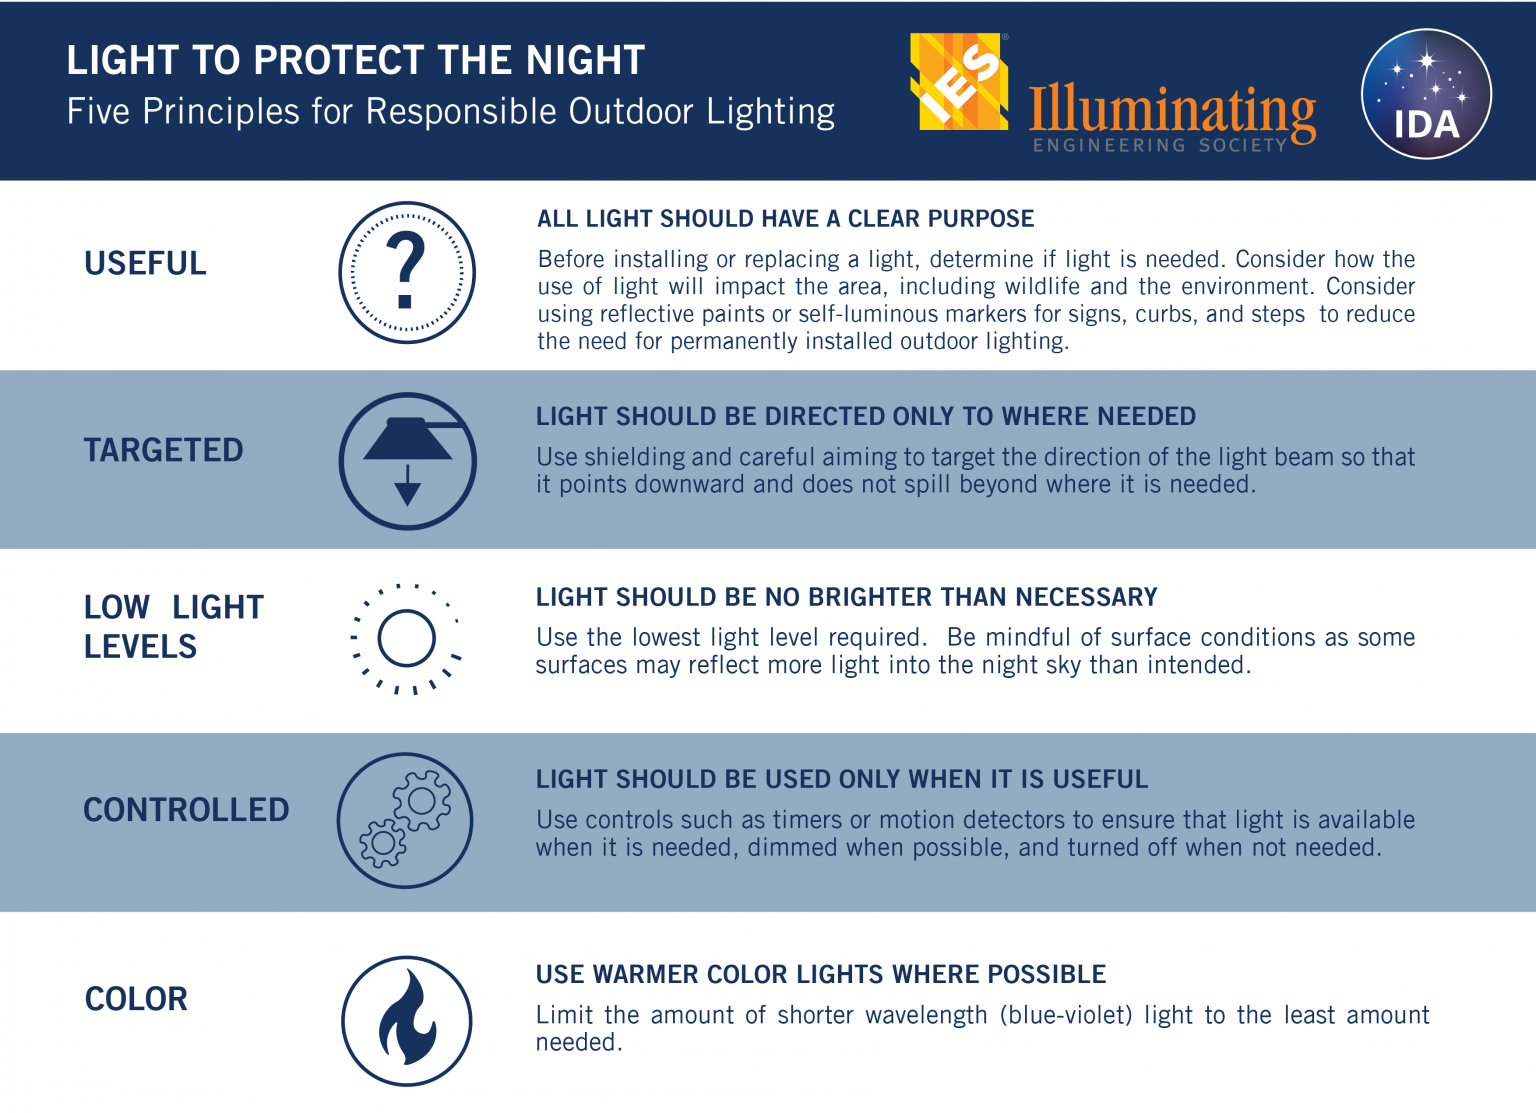 5 outdoor lighting tips from IES/IDA: Useful, Targeted, Low Light Levels, Controlled, and Color